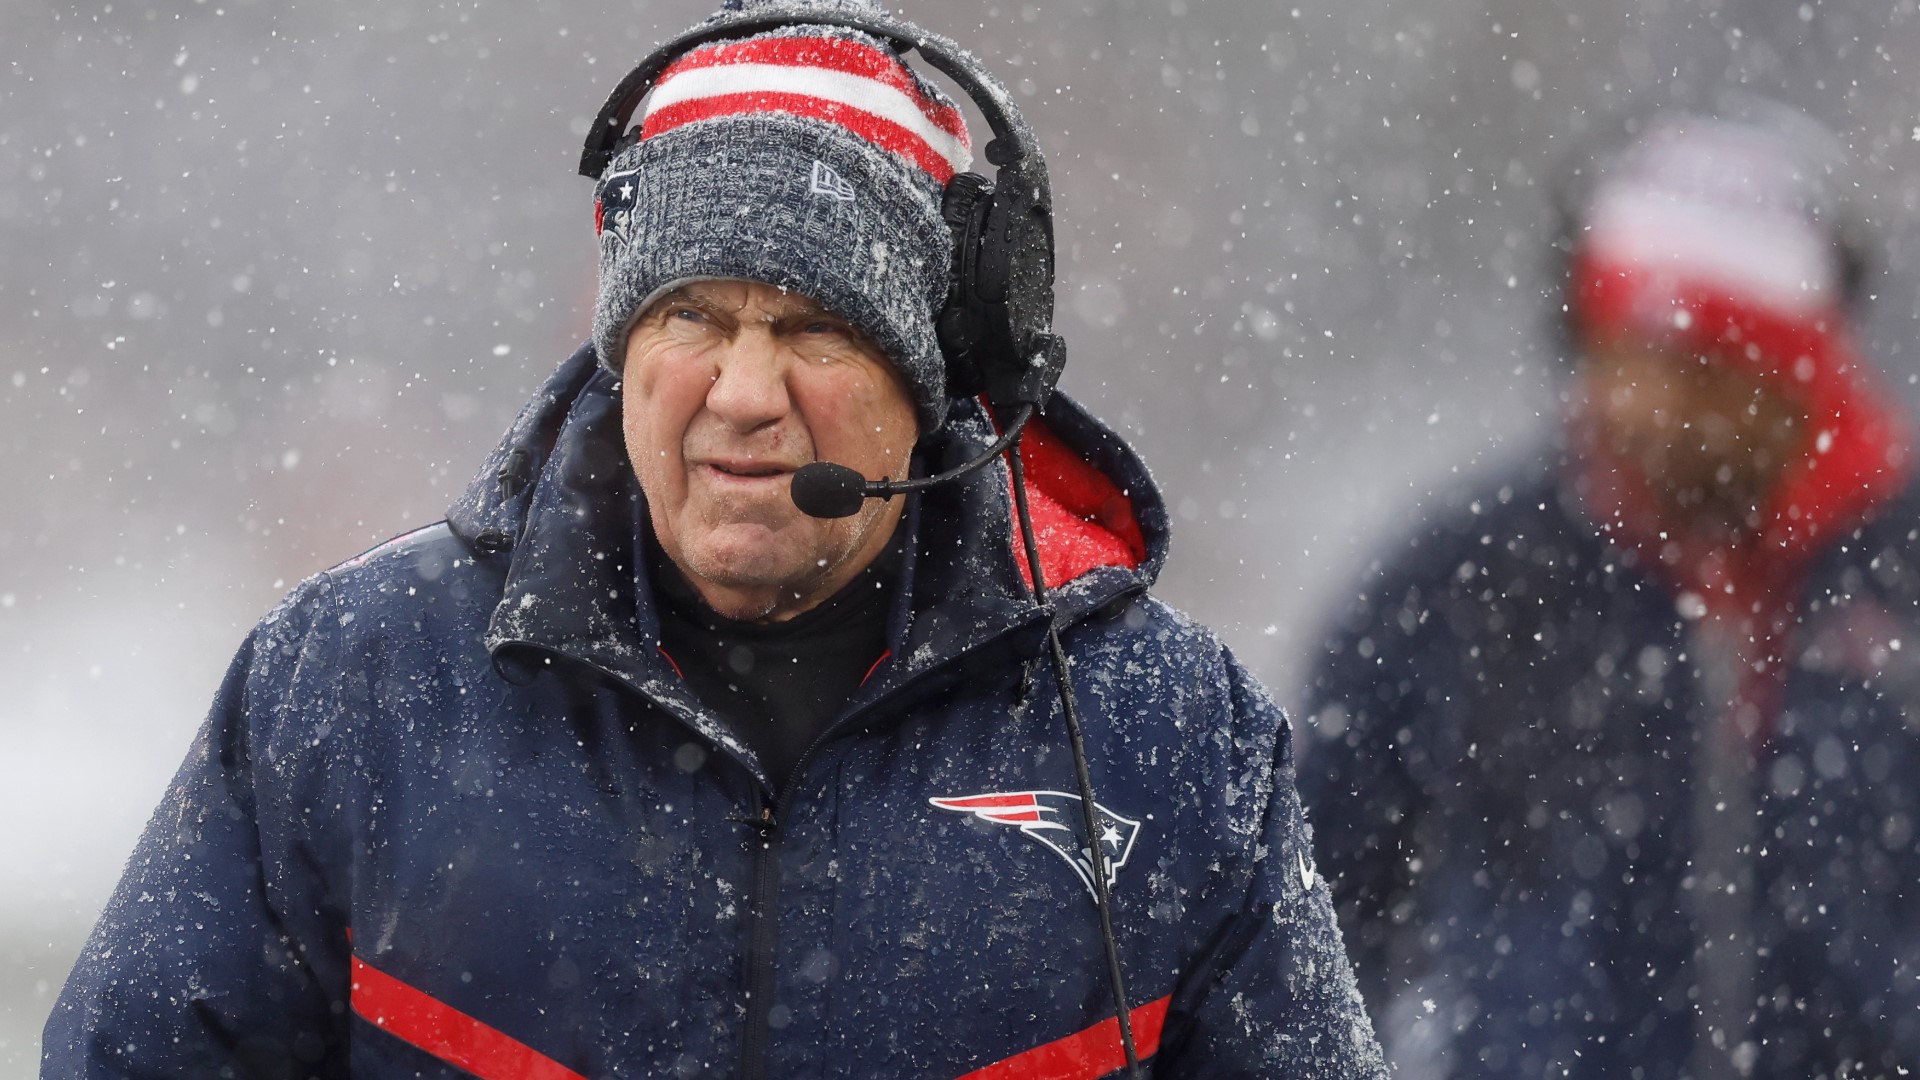 Rumblings of Bill Belichick's departure from the New England Patriots have been circulating for weeks, but it was made official in an announcement Jan. 11.